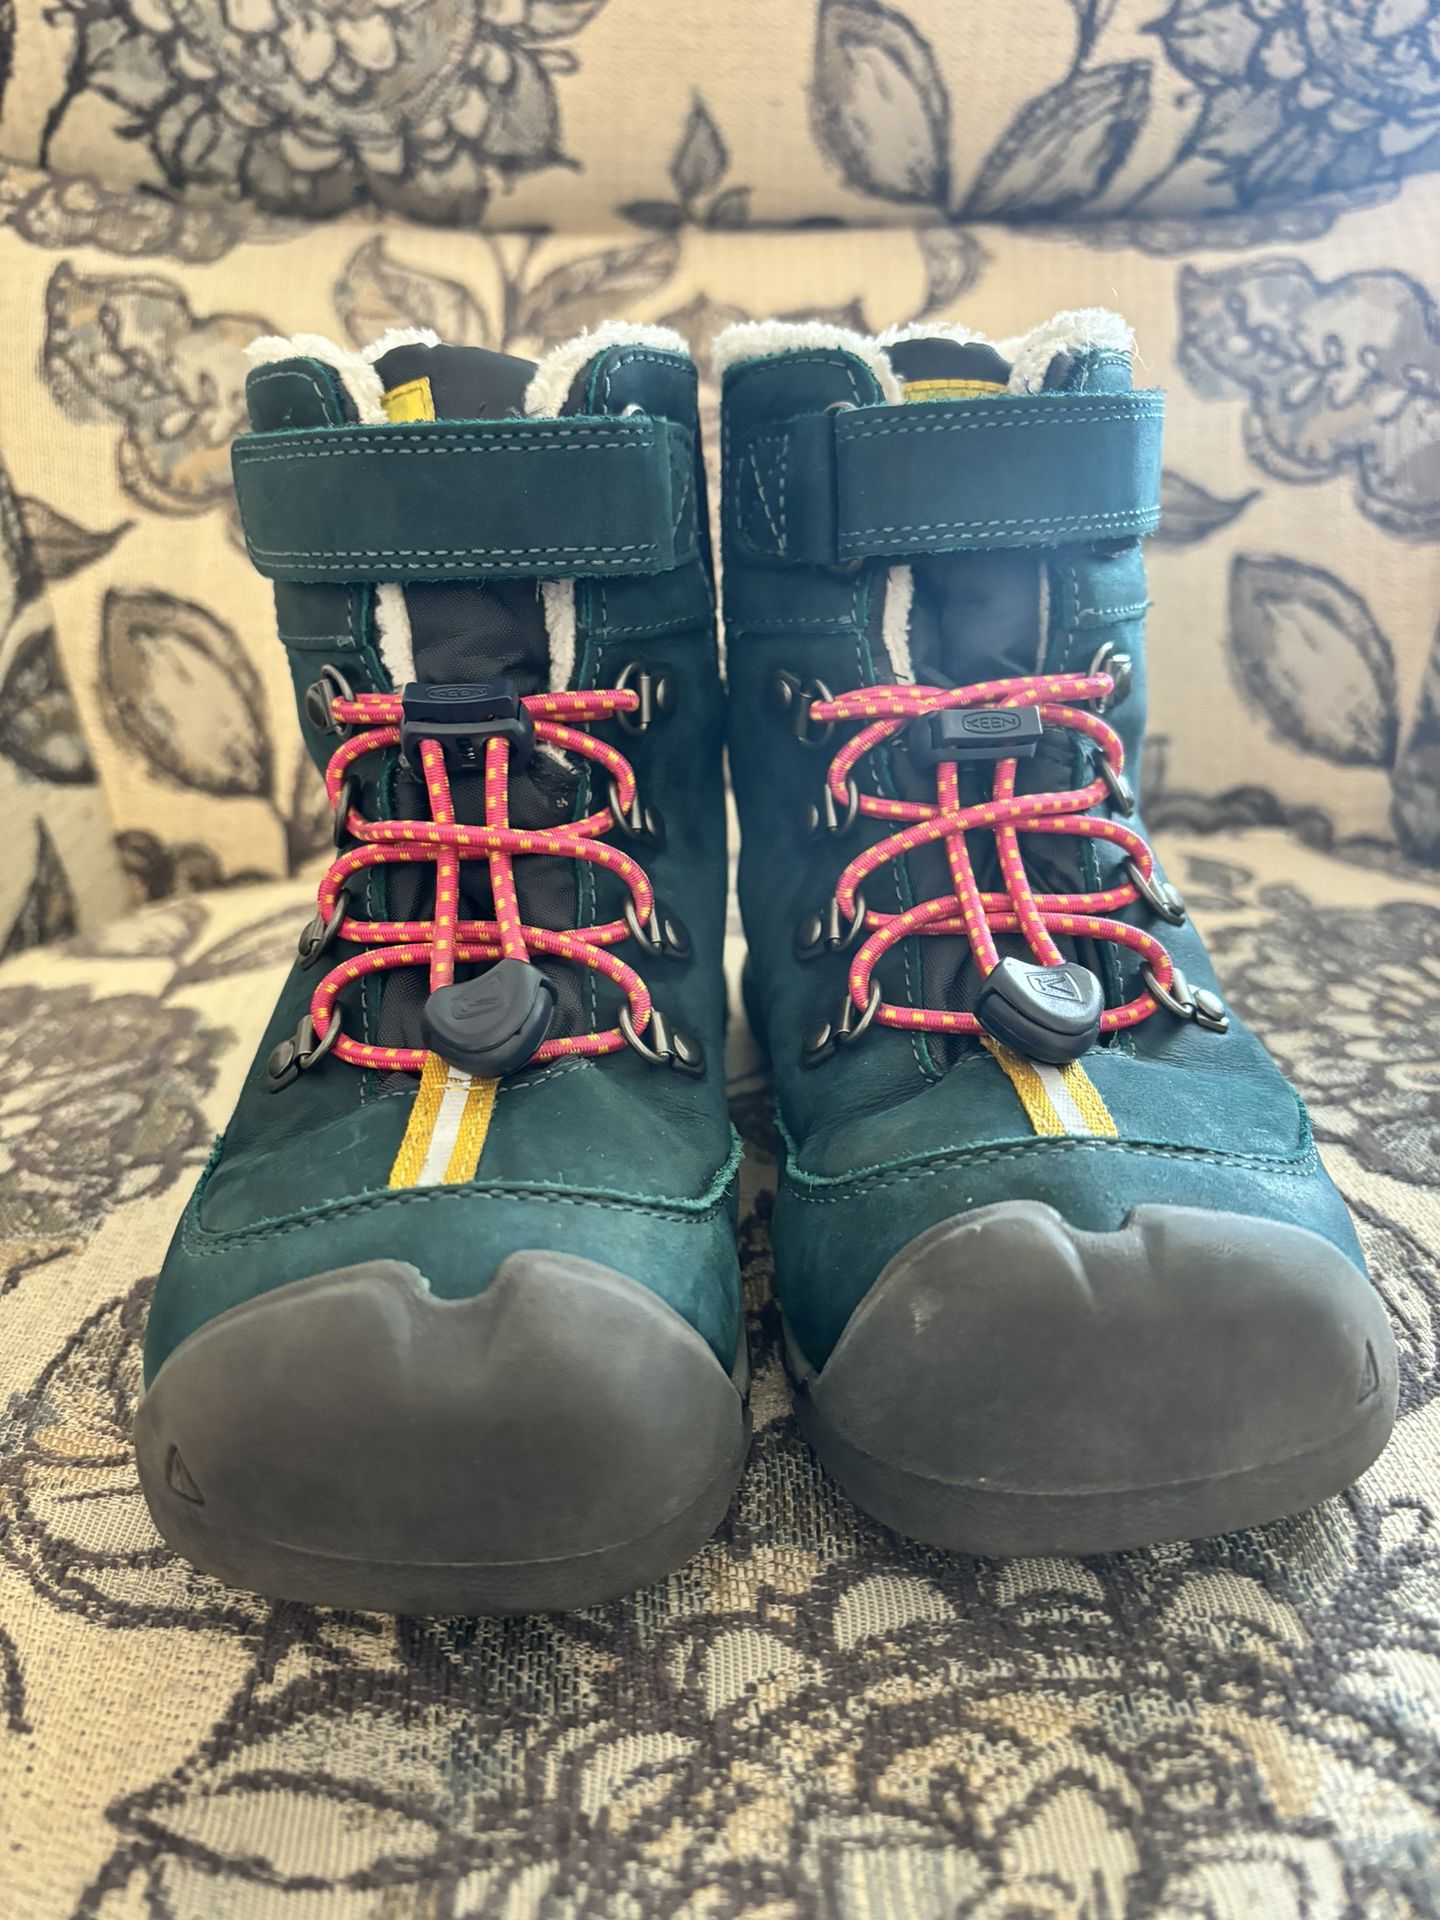 *LIKE NEW* Kids Winter Snow Boots! KEEN Size 12